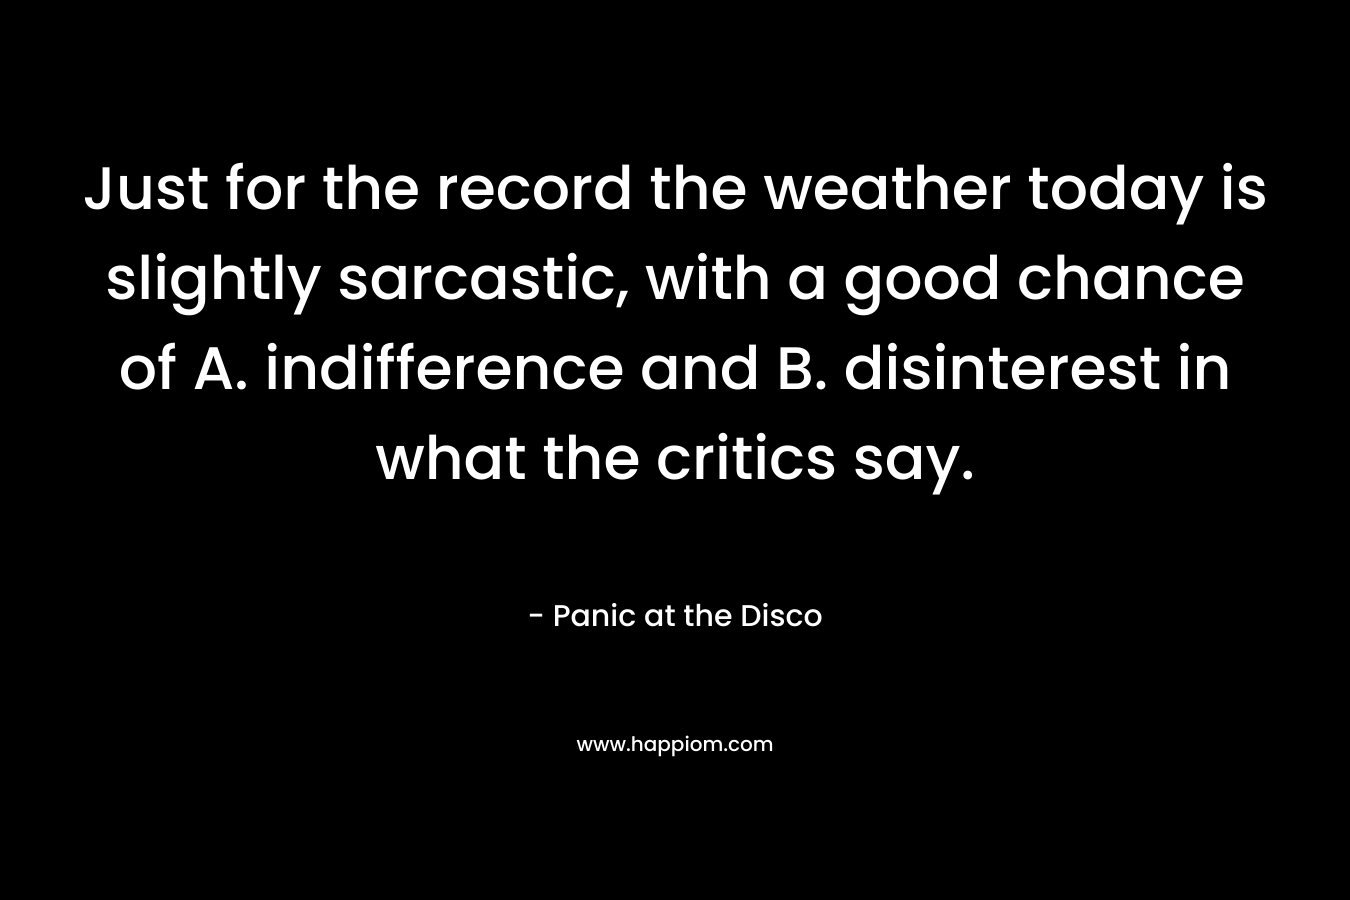 Just for the record the weather today is slightly sarcastic, with a good chance of A. indifference and B. disinterest in what the critics say. – Panic at the Disco